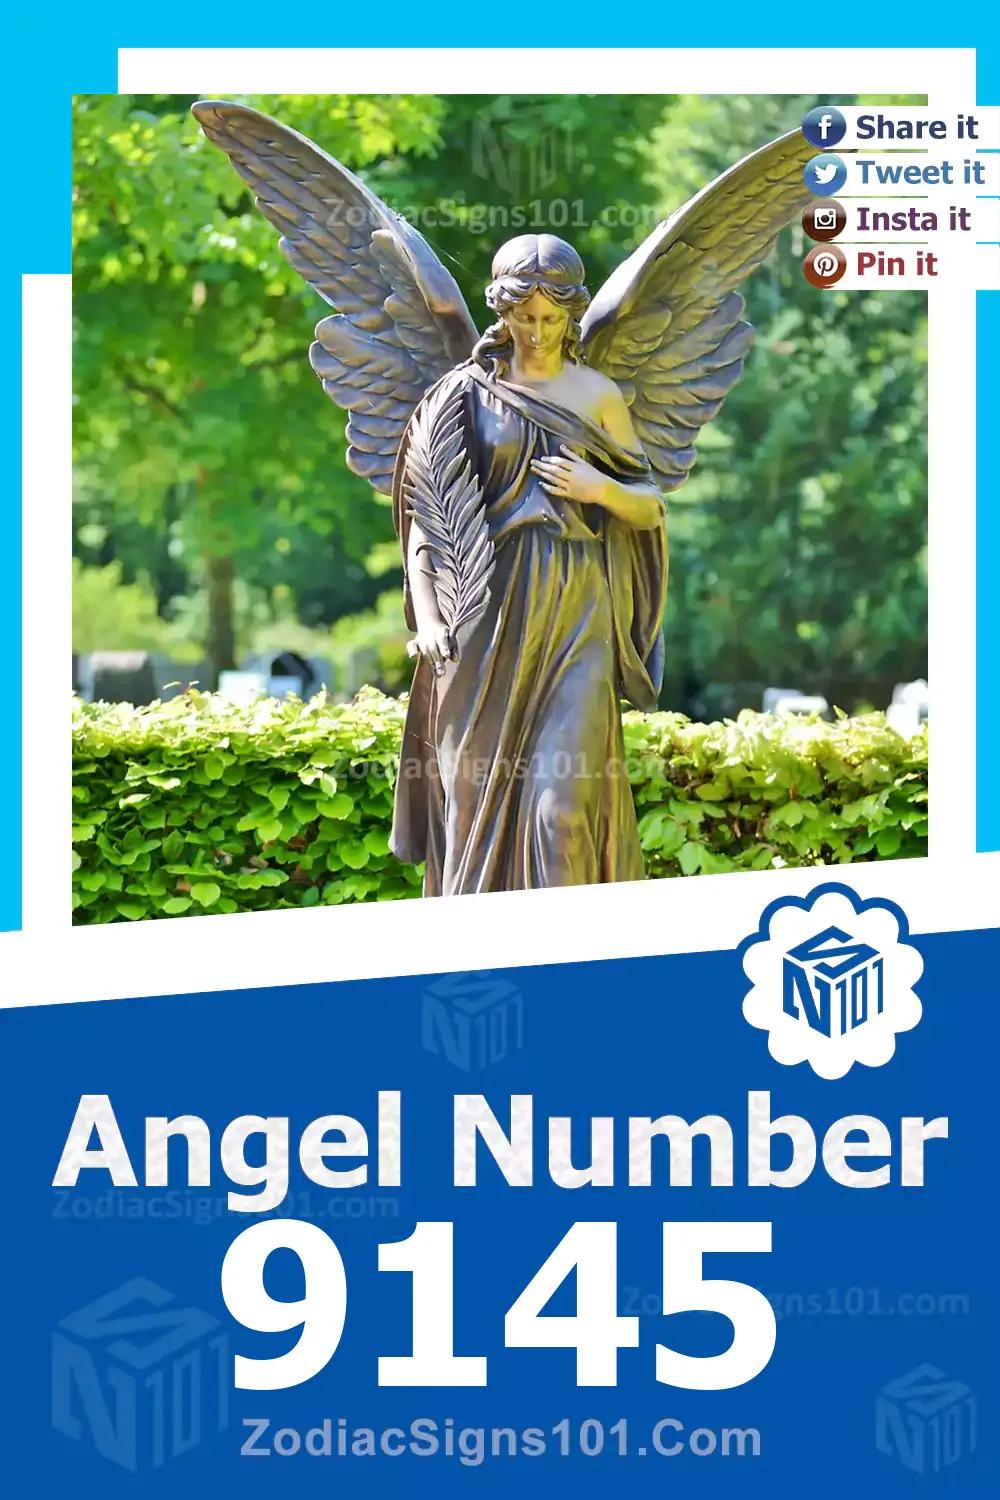 9145 Angel Number Meaning